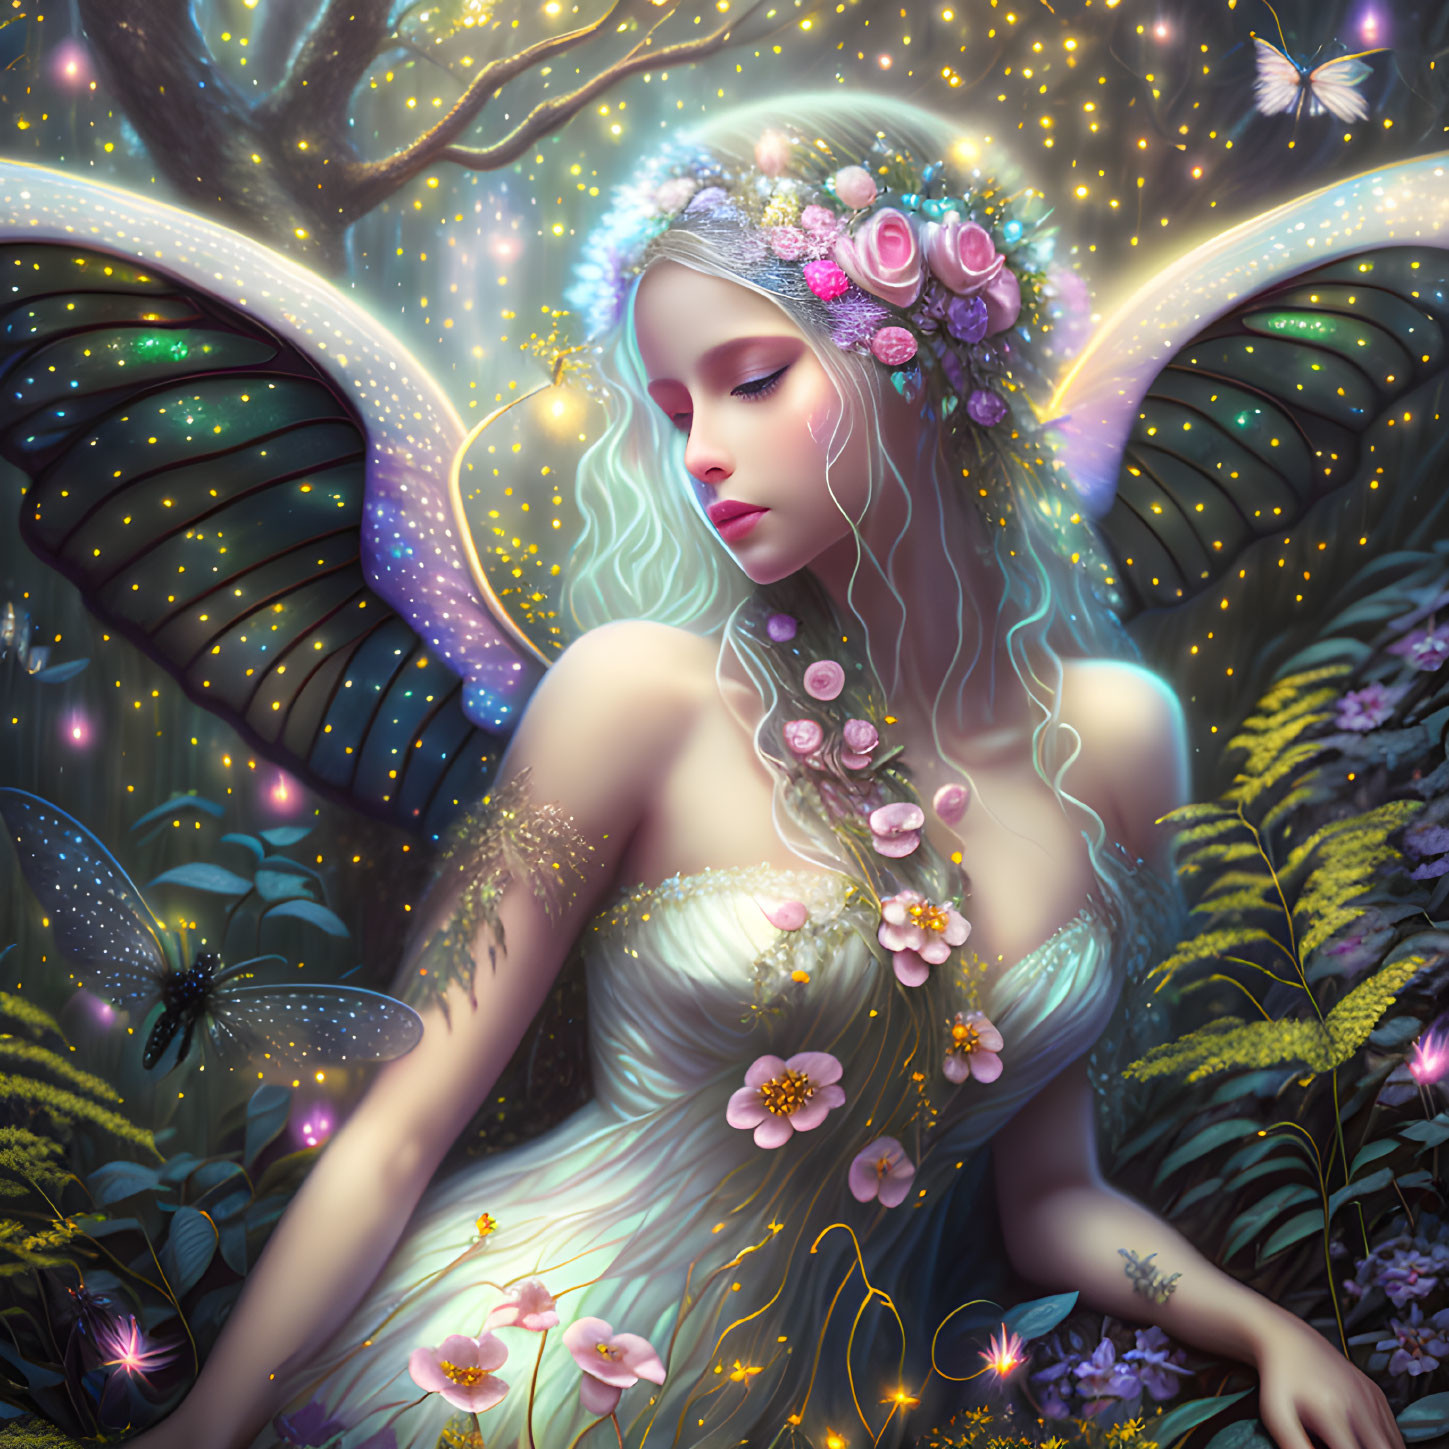 Ethereal being with glowing butterfly wings in vibrant enchanted forest